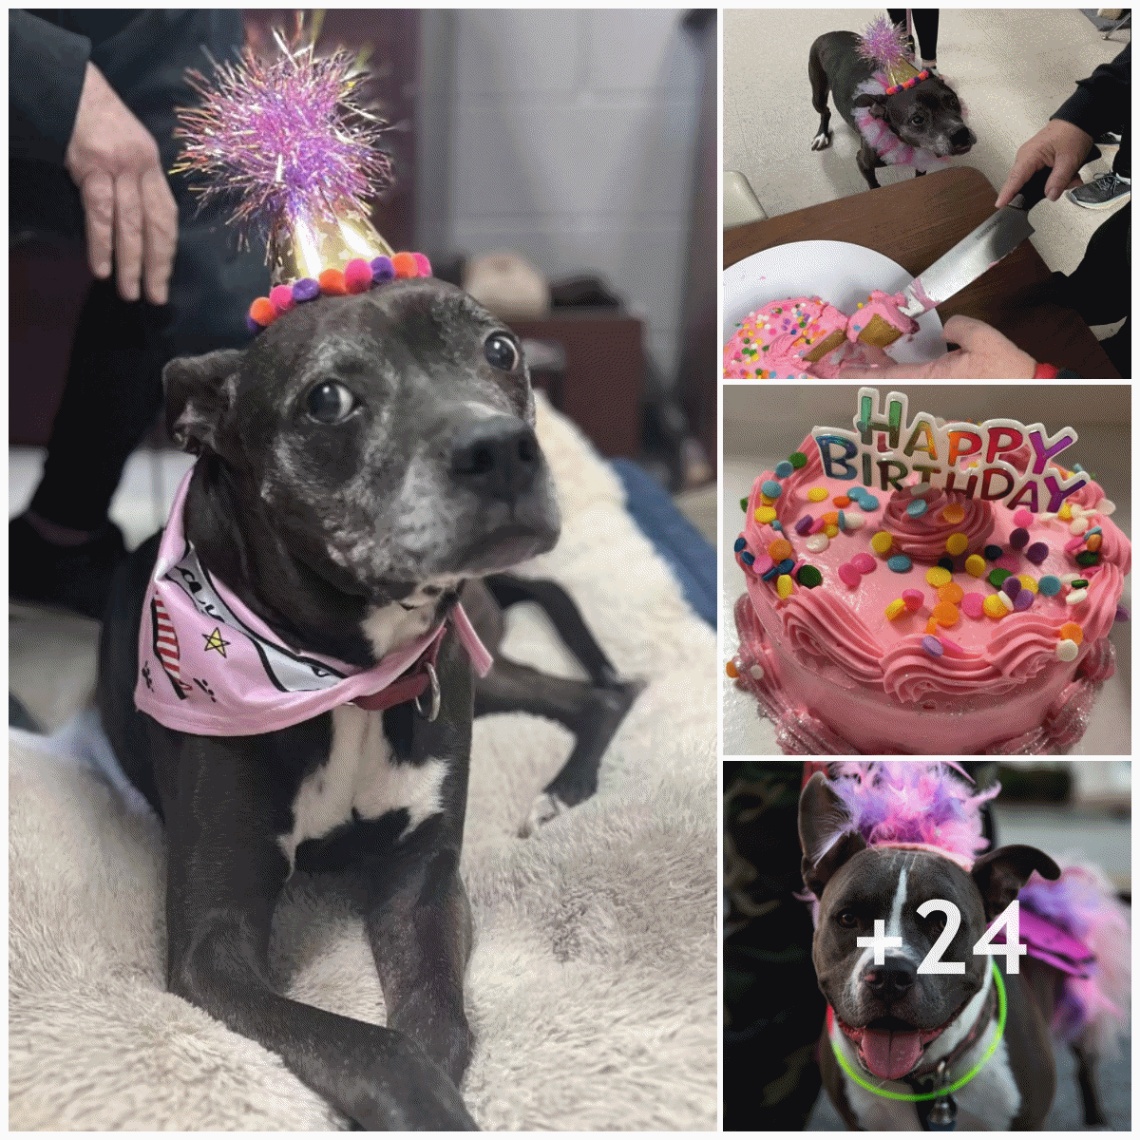 The old dog’s tearful reaction when the rescuer set up a birthday celebration complete with cake, candles, and joy